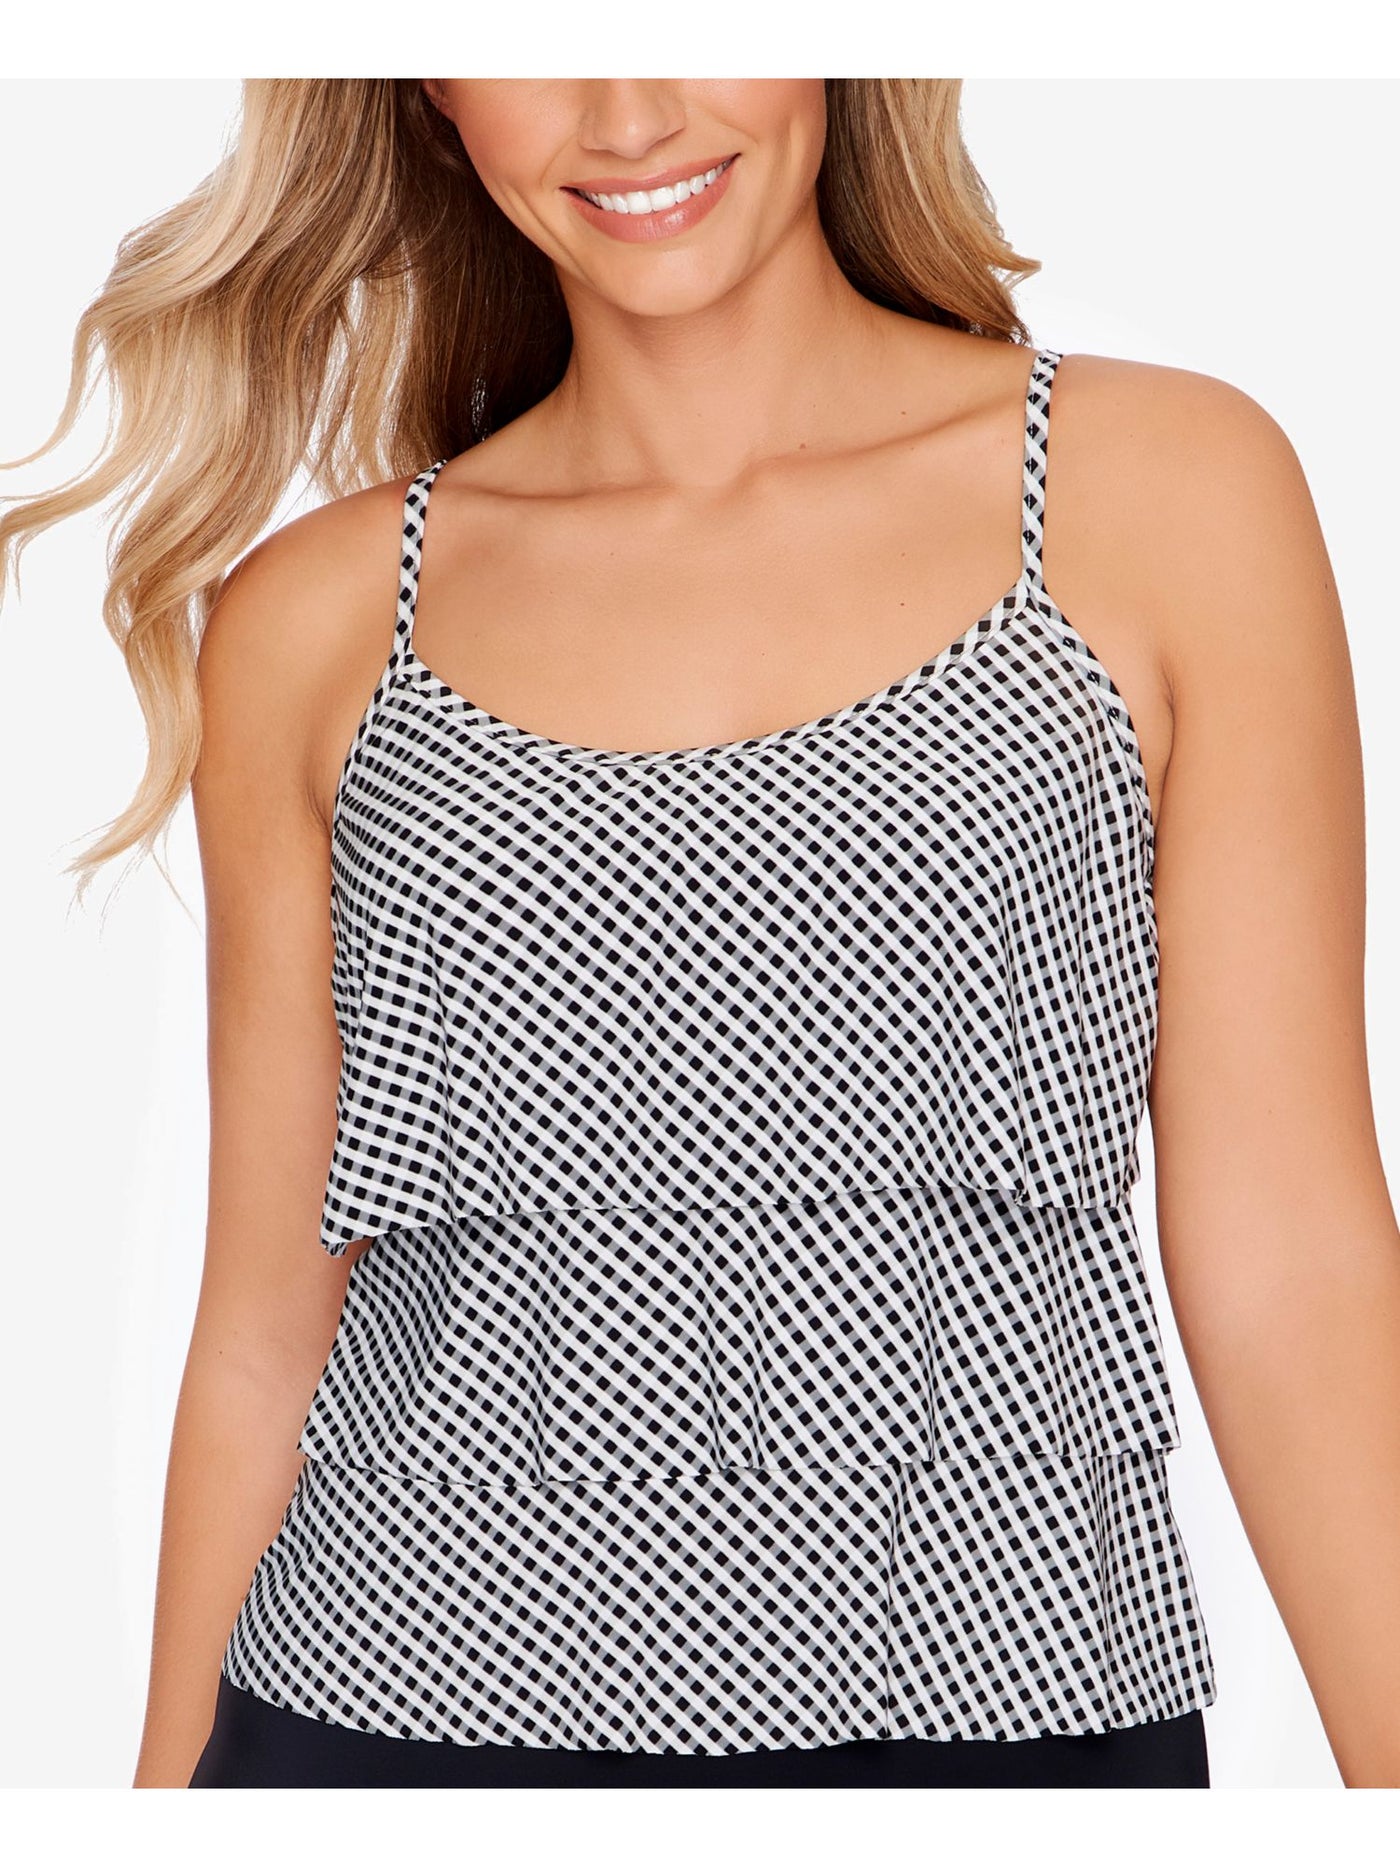 SWIM SOLUTIONS Women's Black Gingham Full Bust Support Triple Tier Lined Stretch Ring Scoop Neck Tankini Swimsuit Top 10